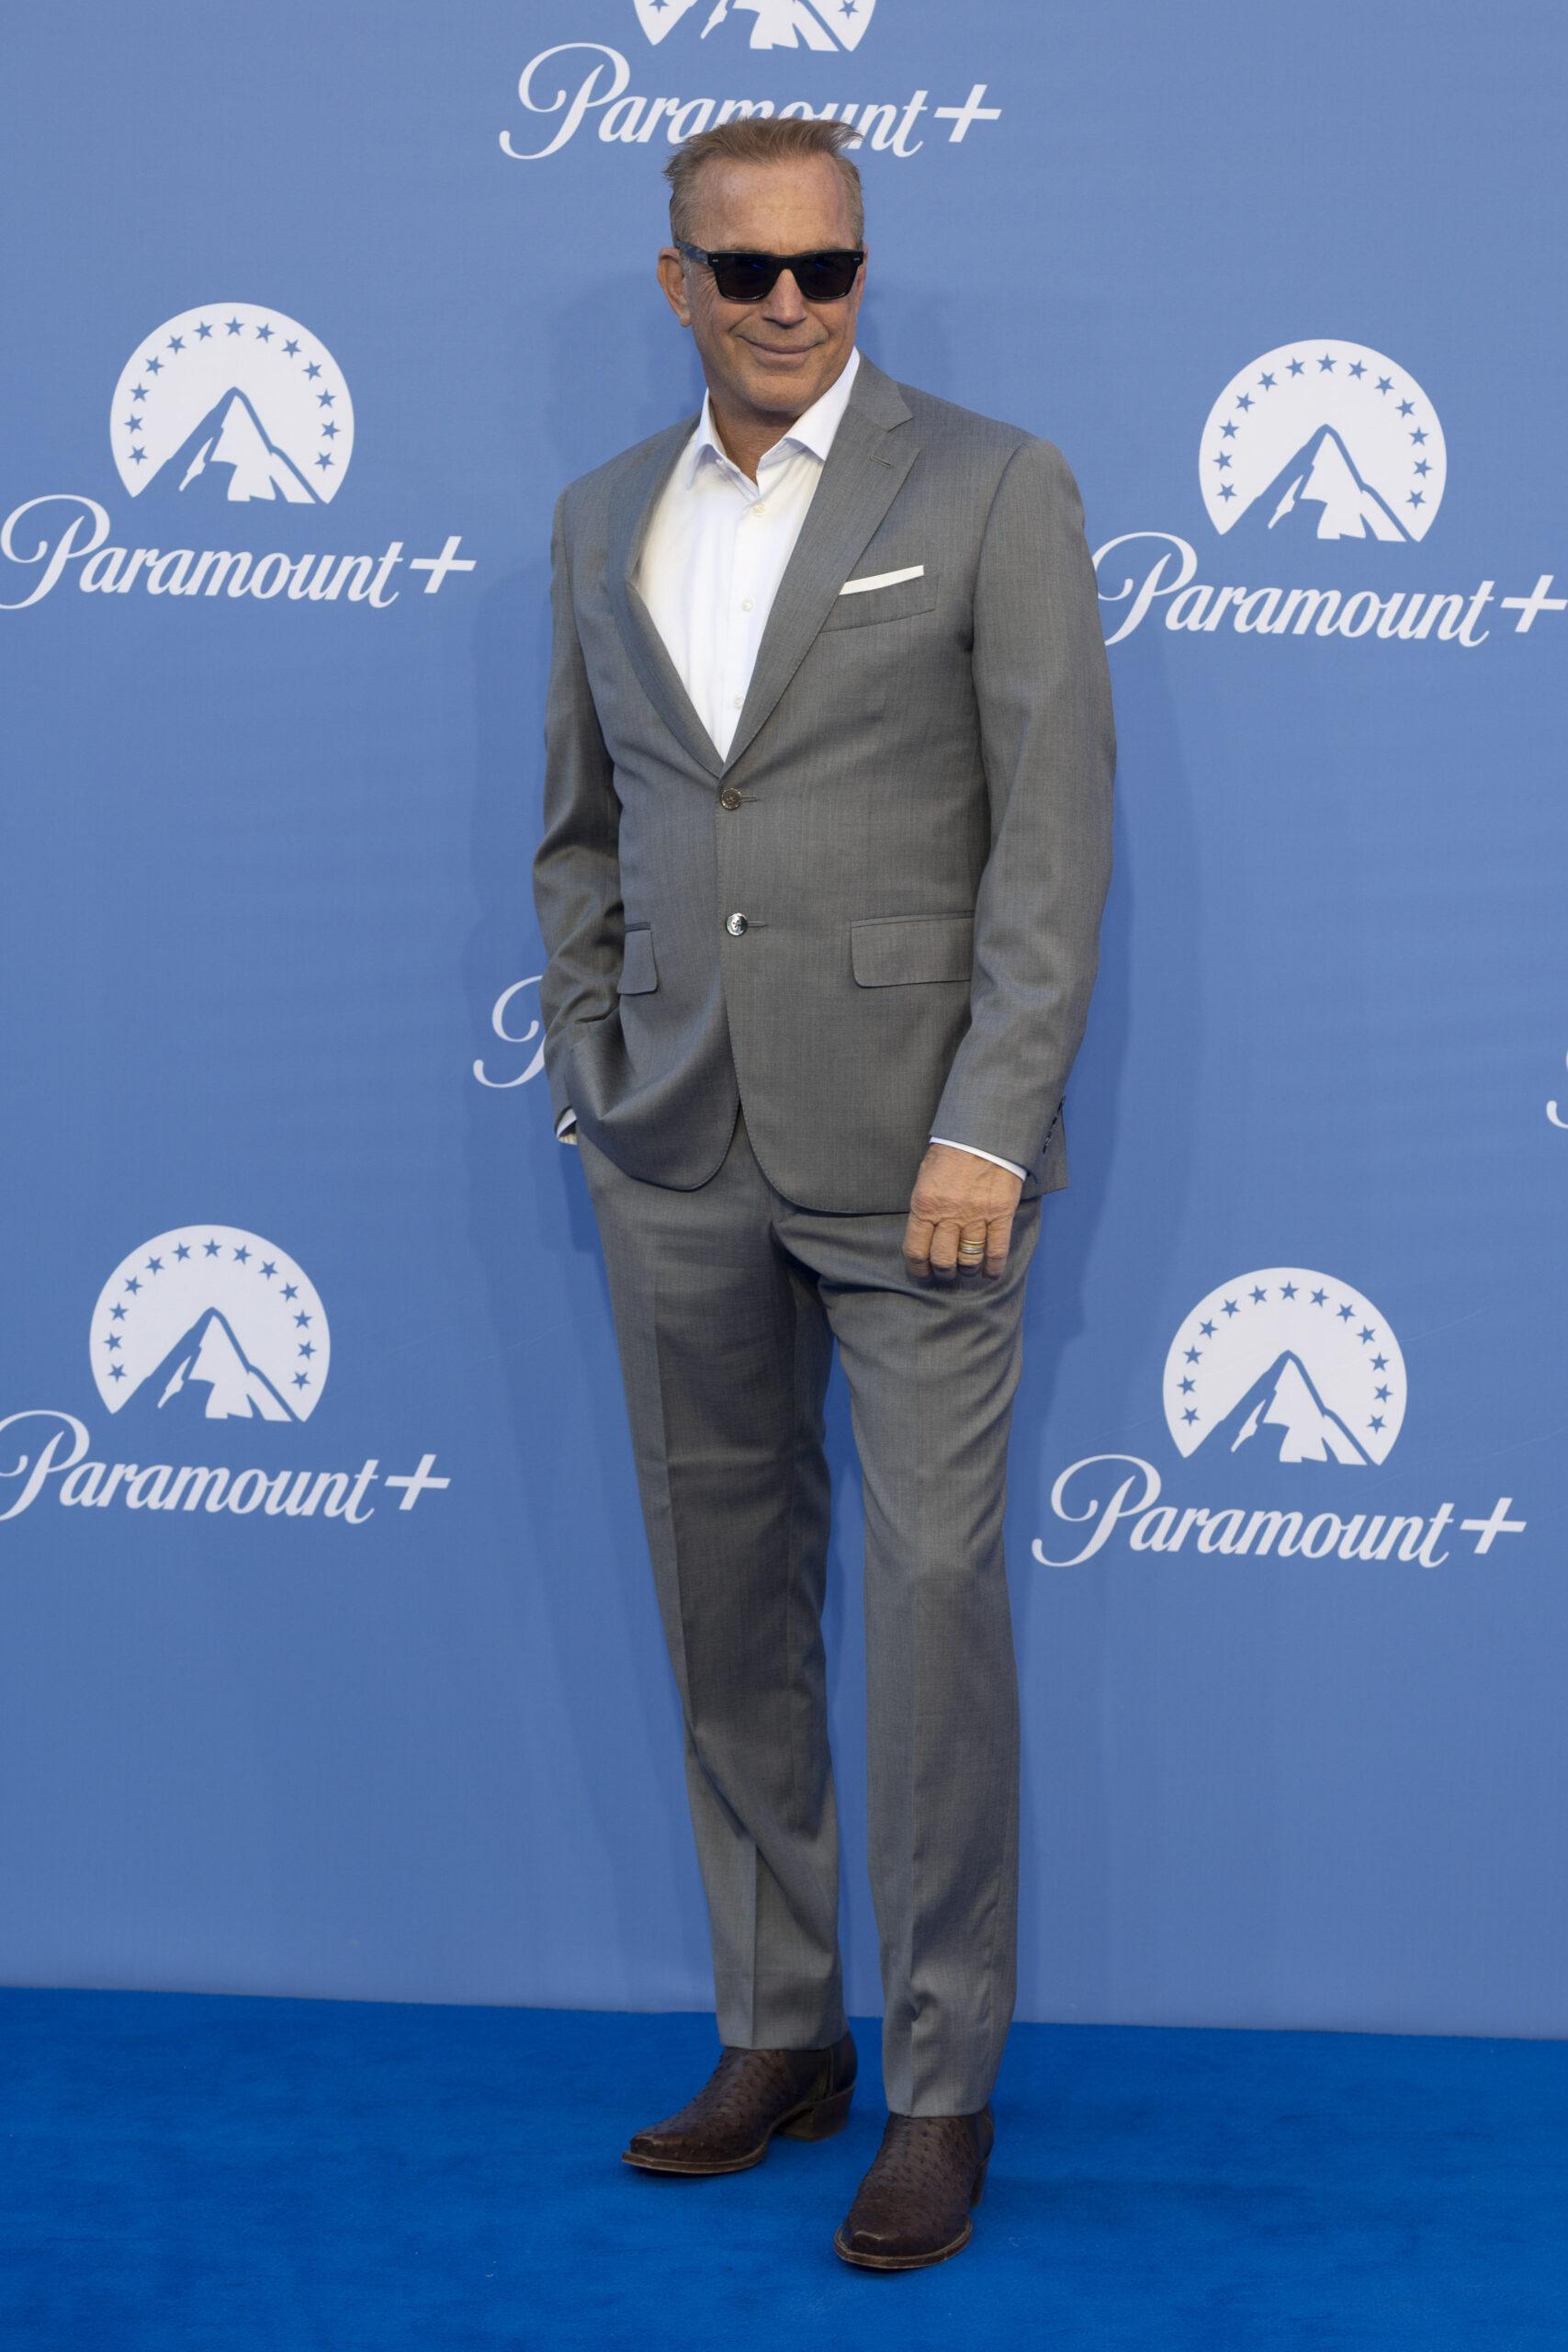 Paramount Launch Event